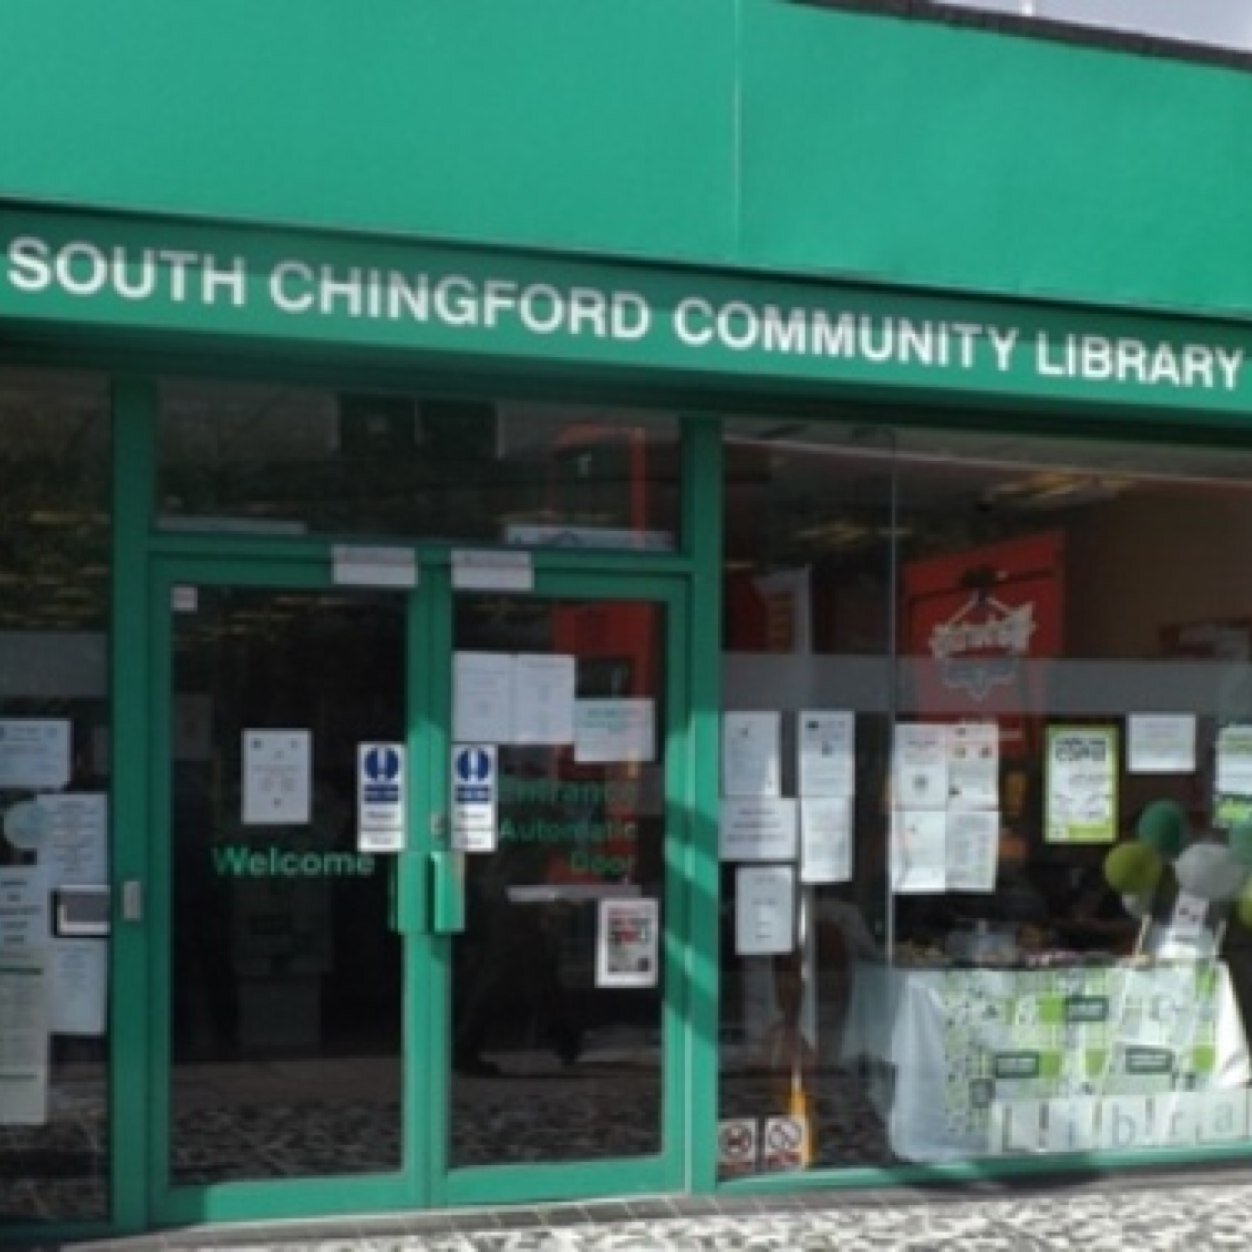 A volunteer community library centre based in the South Chingford area of the London Borough of Waltham Forest. Currently closed during the lockdown. Stay safe!